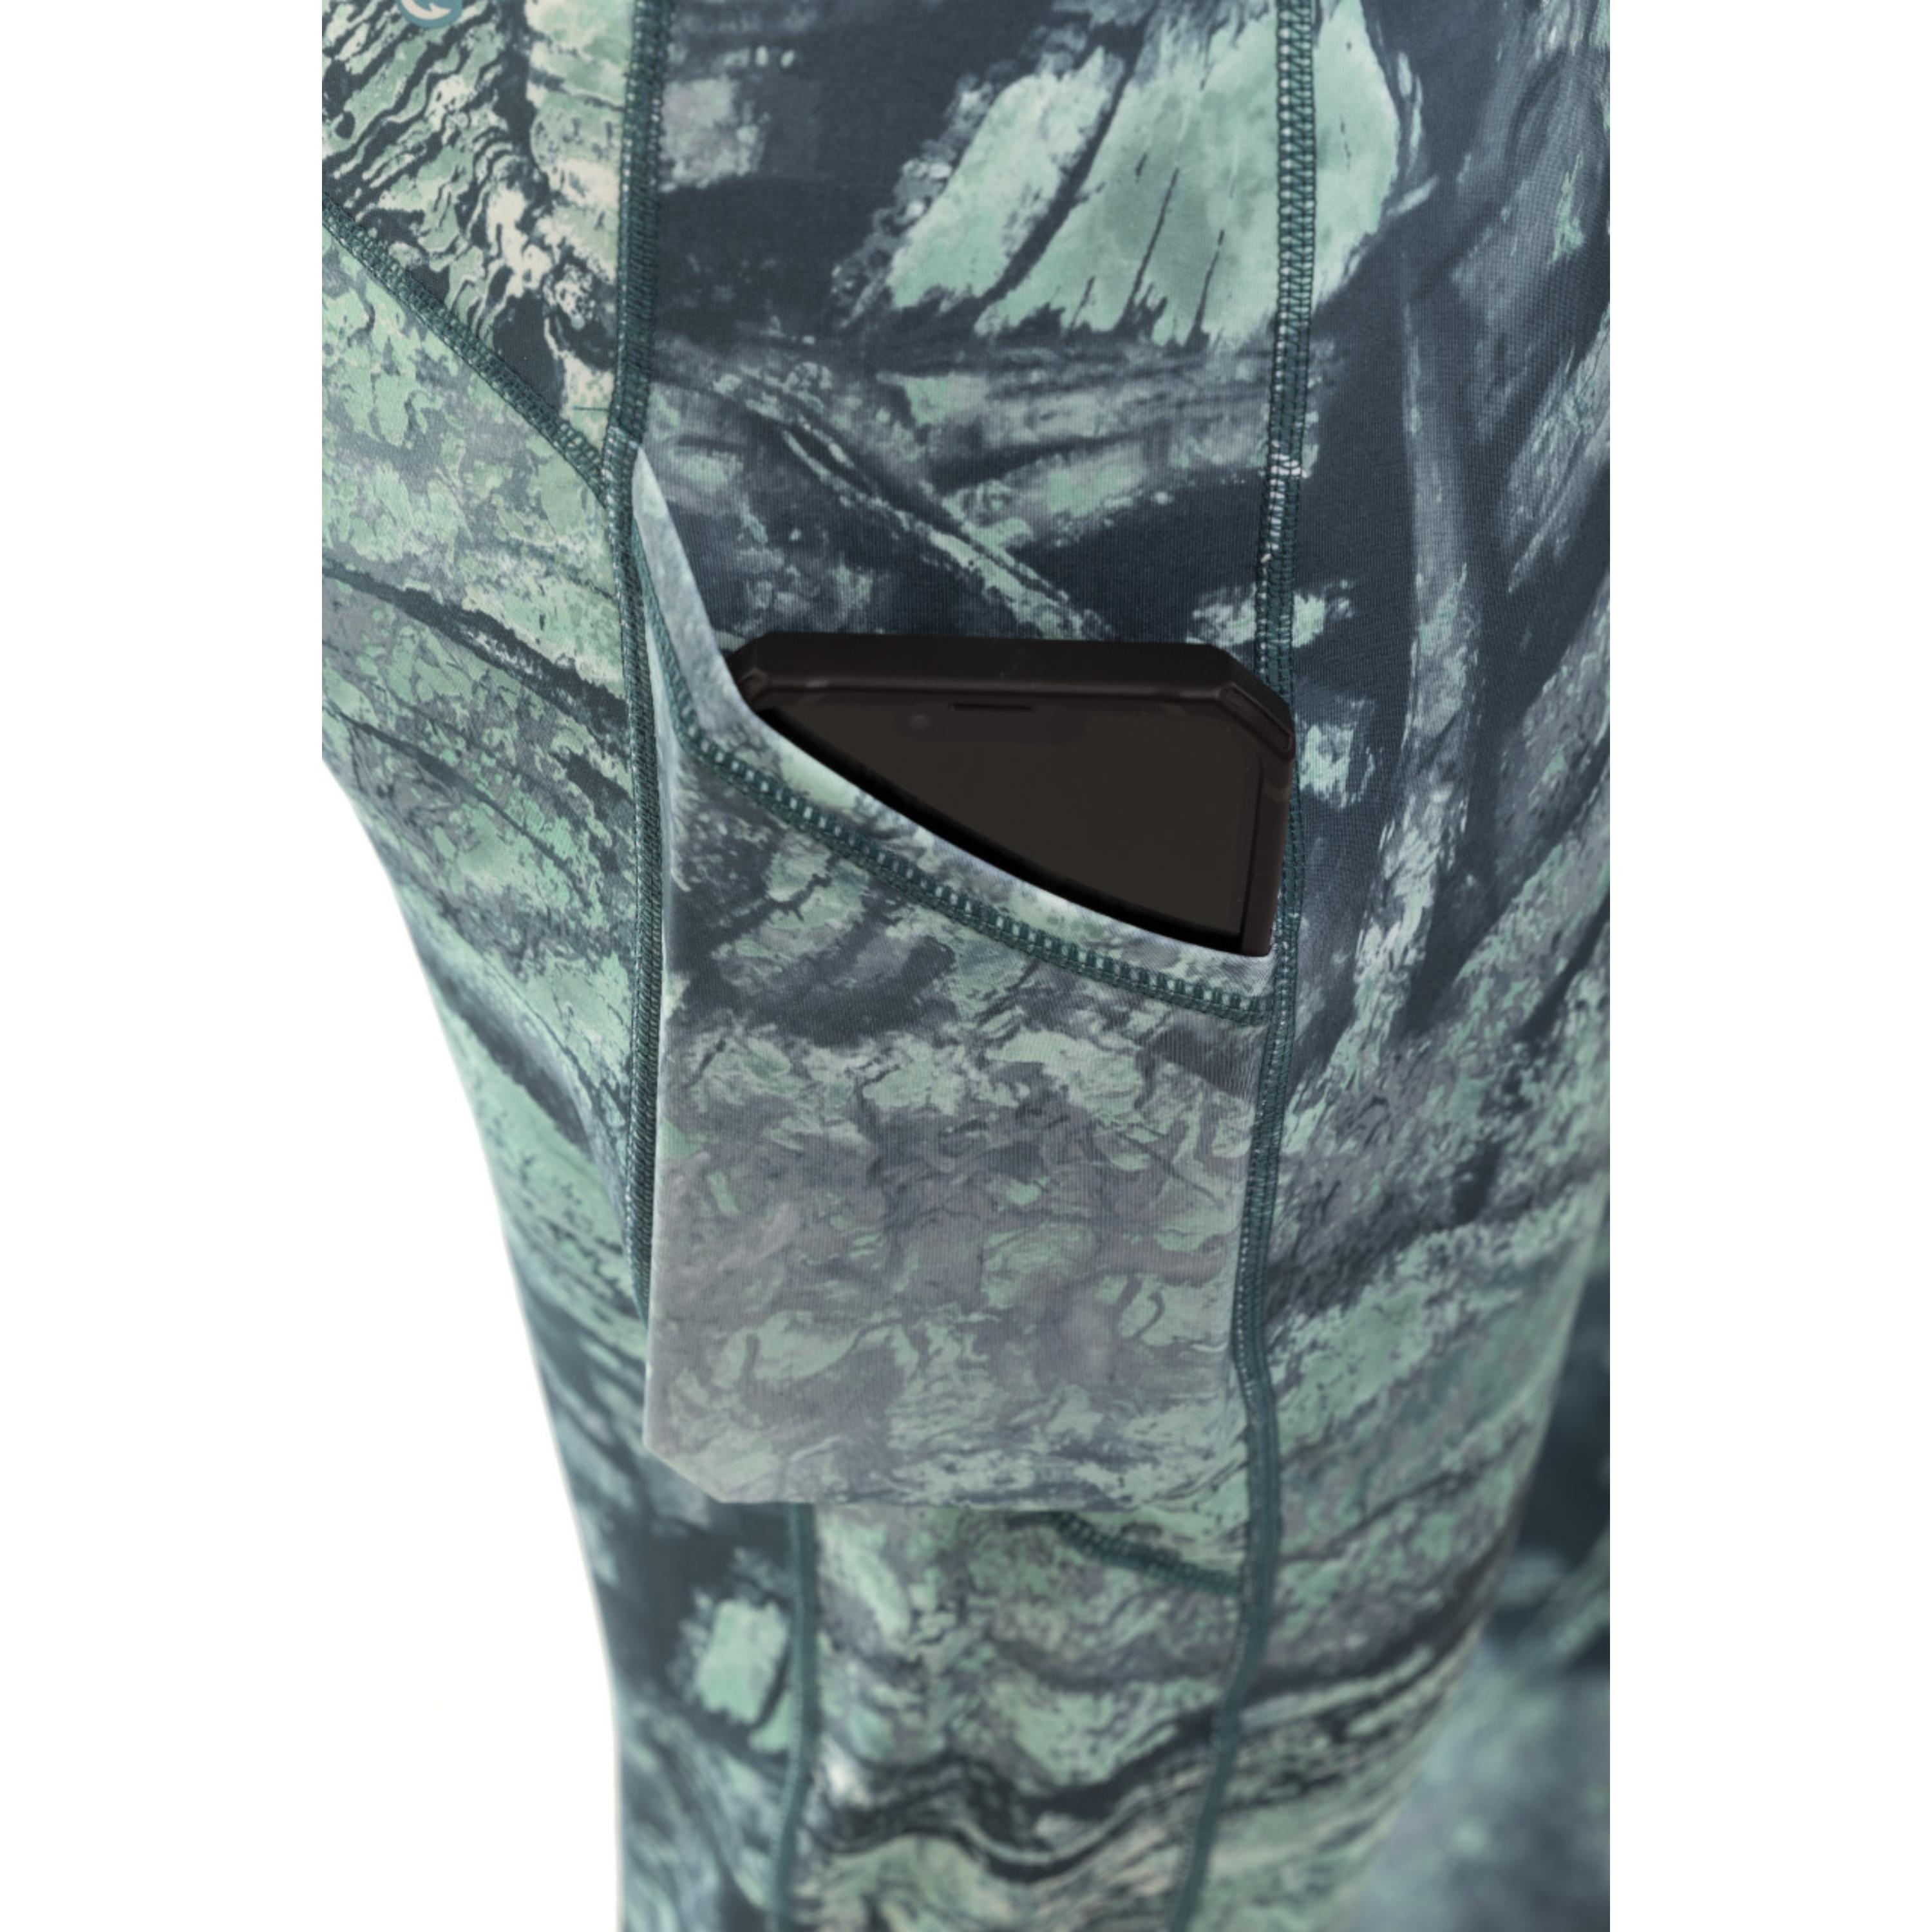 DSG Outerwear Women's Casual Camo Leggings - 730065, Women's Hunting  Clothing at Sportsman's Guide